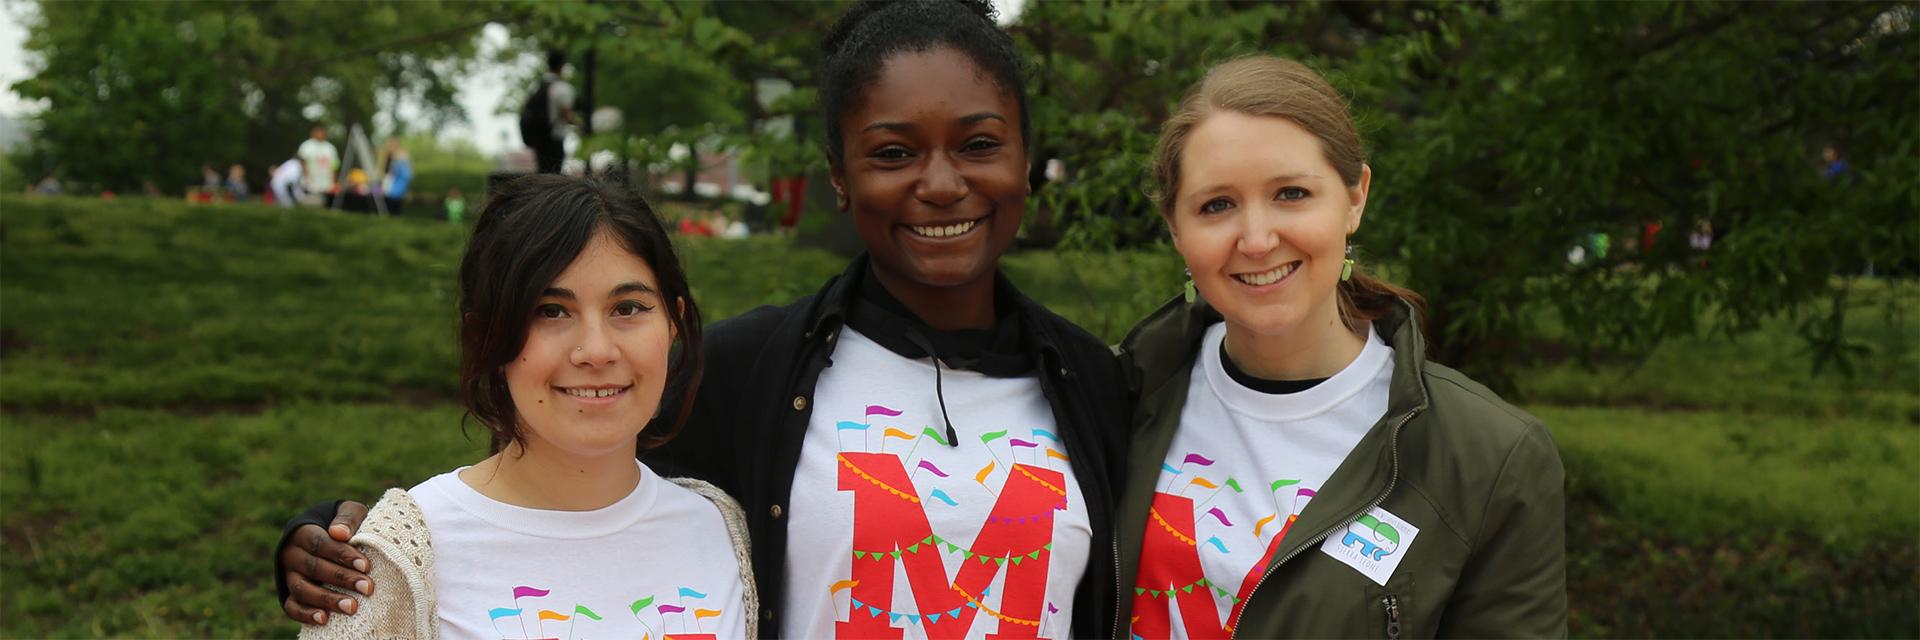 Student Volunteers at Maryland Day at the University of Maryland